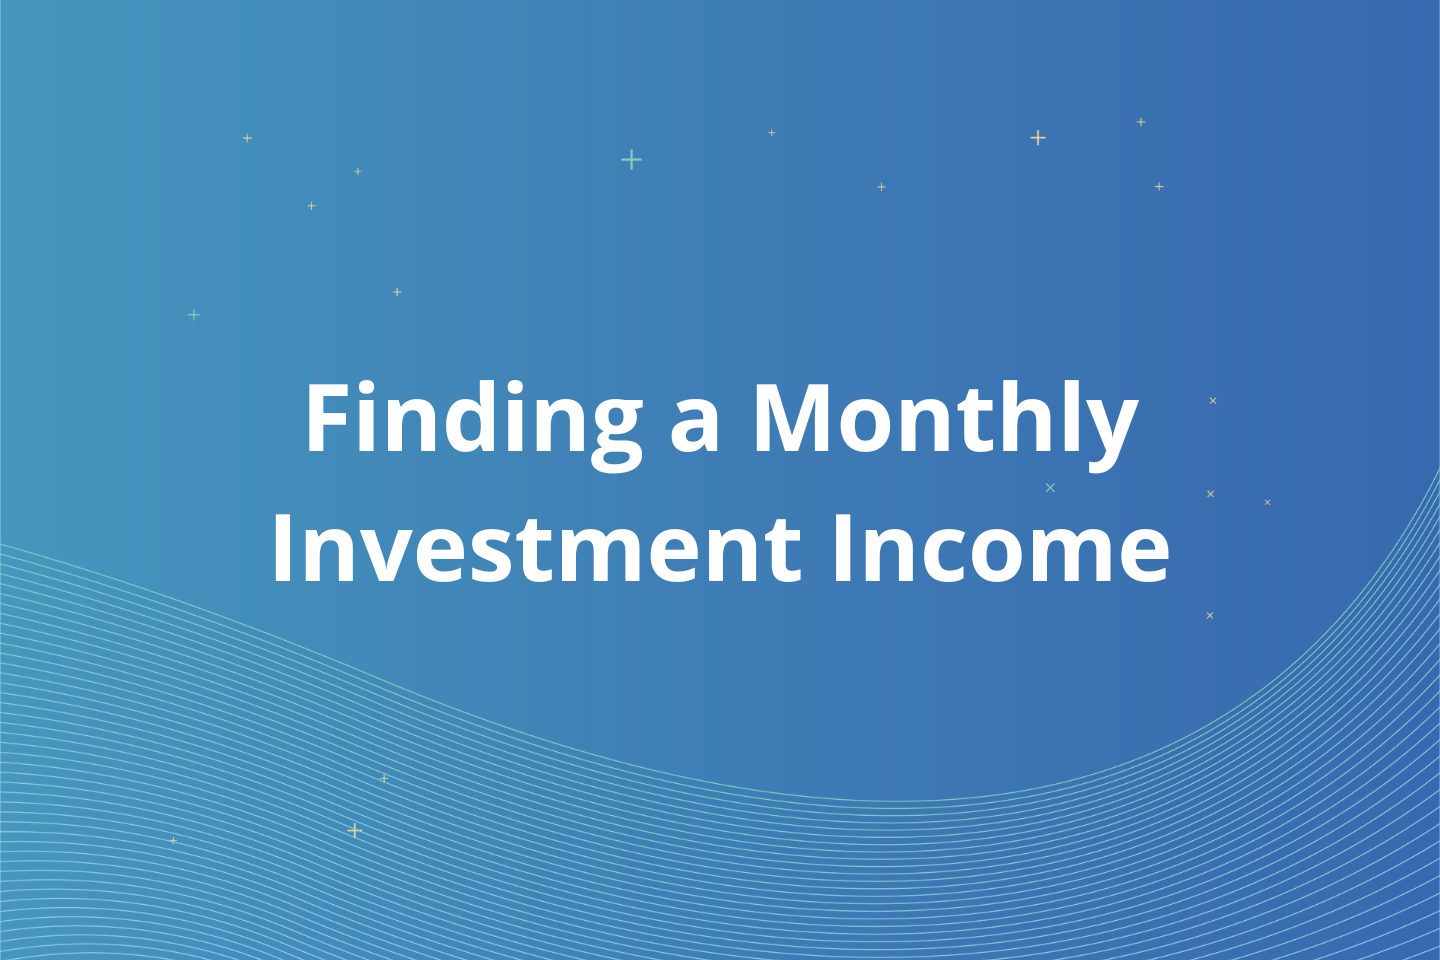 Finding a Monthly Investment Income